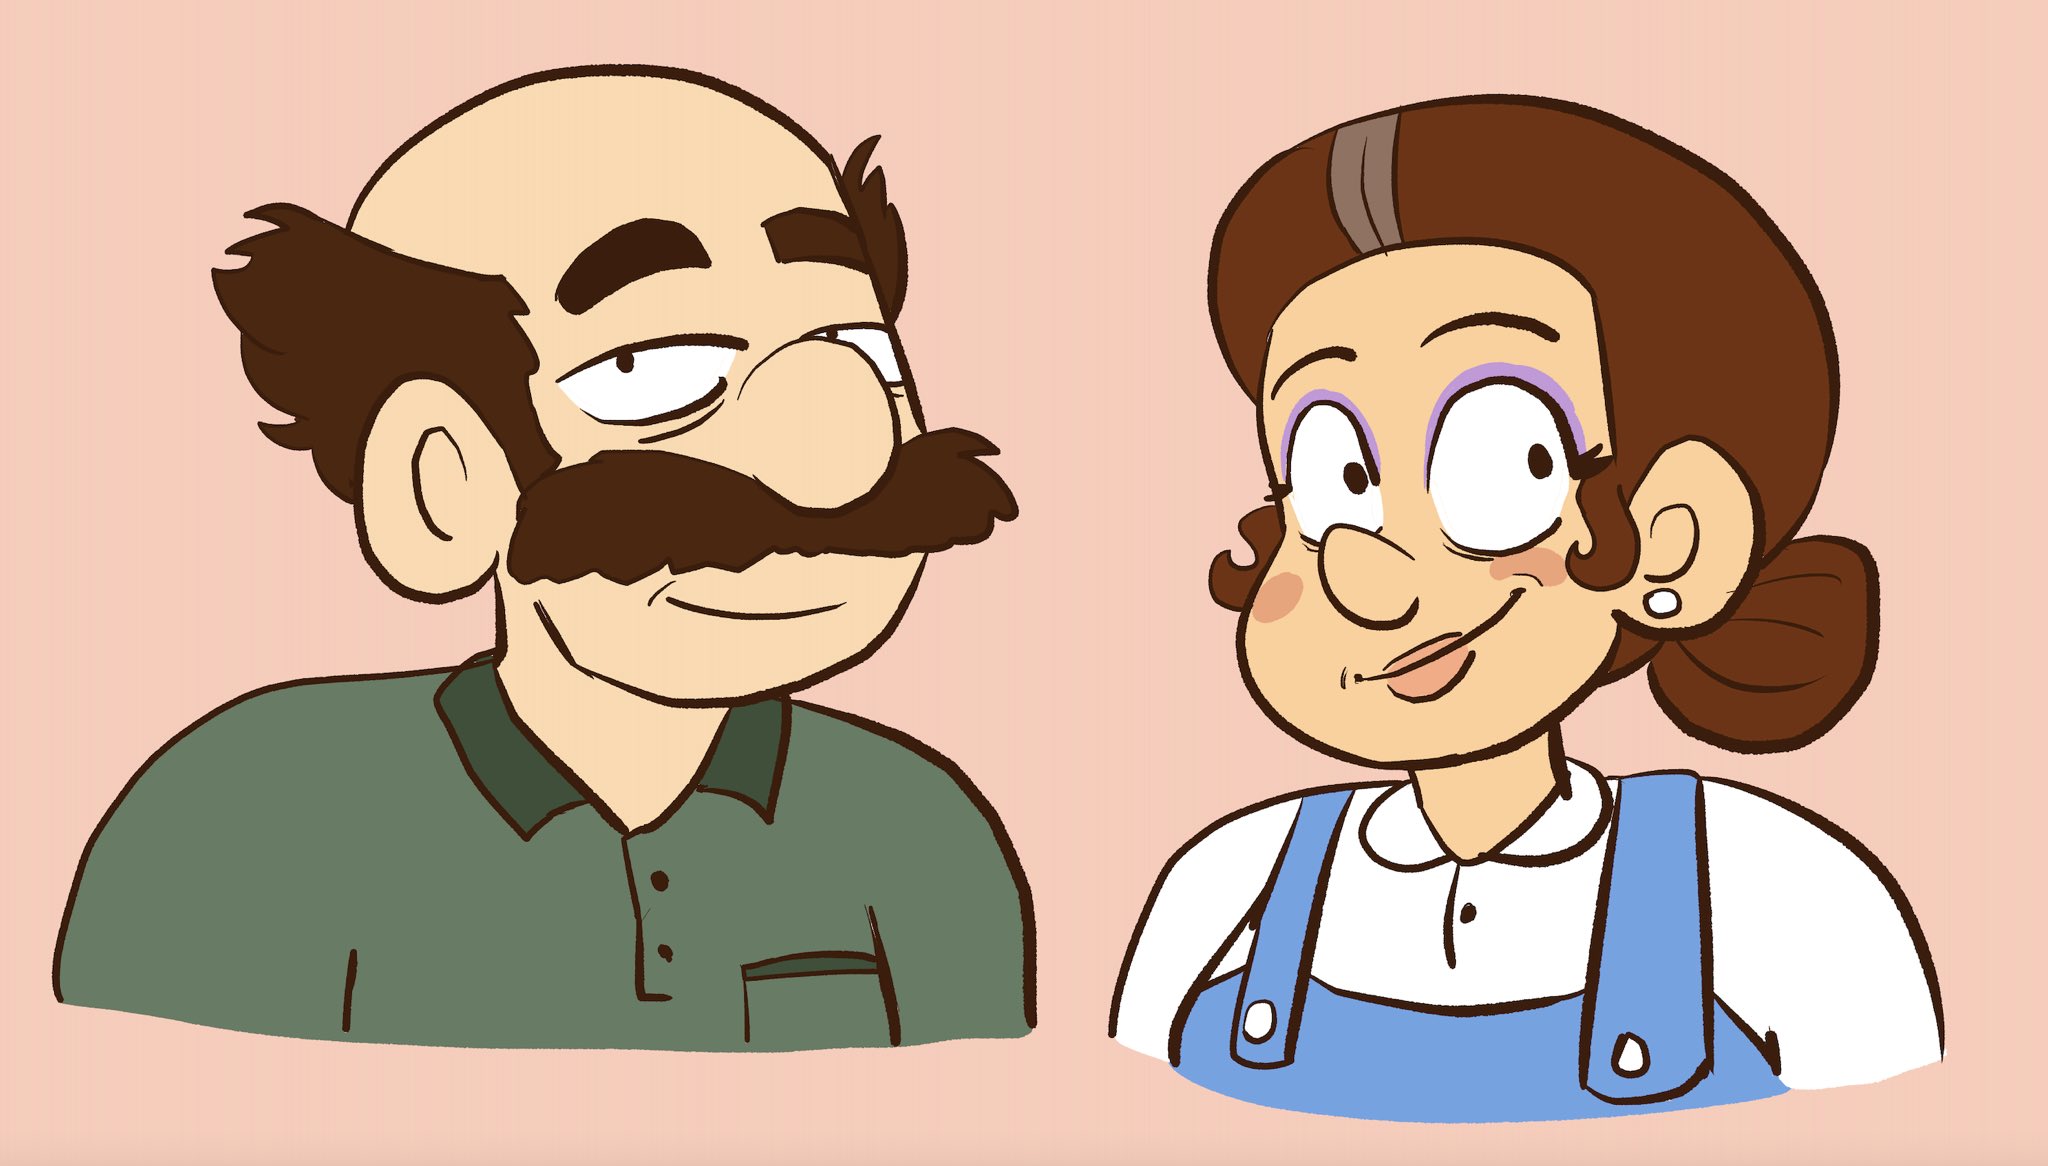 Who Are Mario And Luigi's Parents?